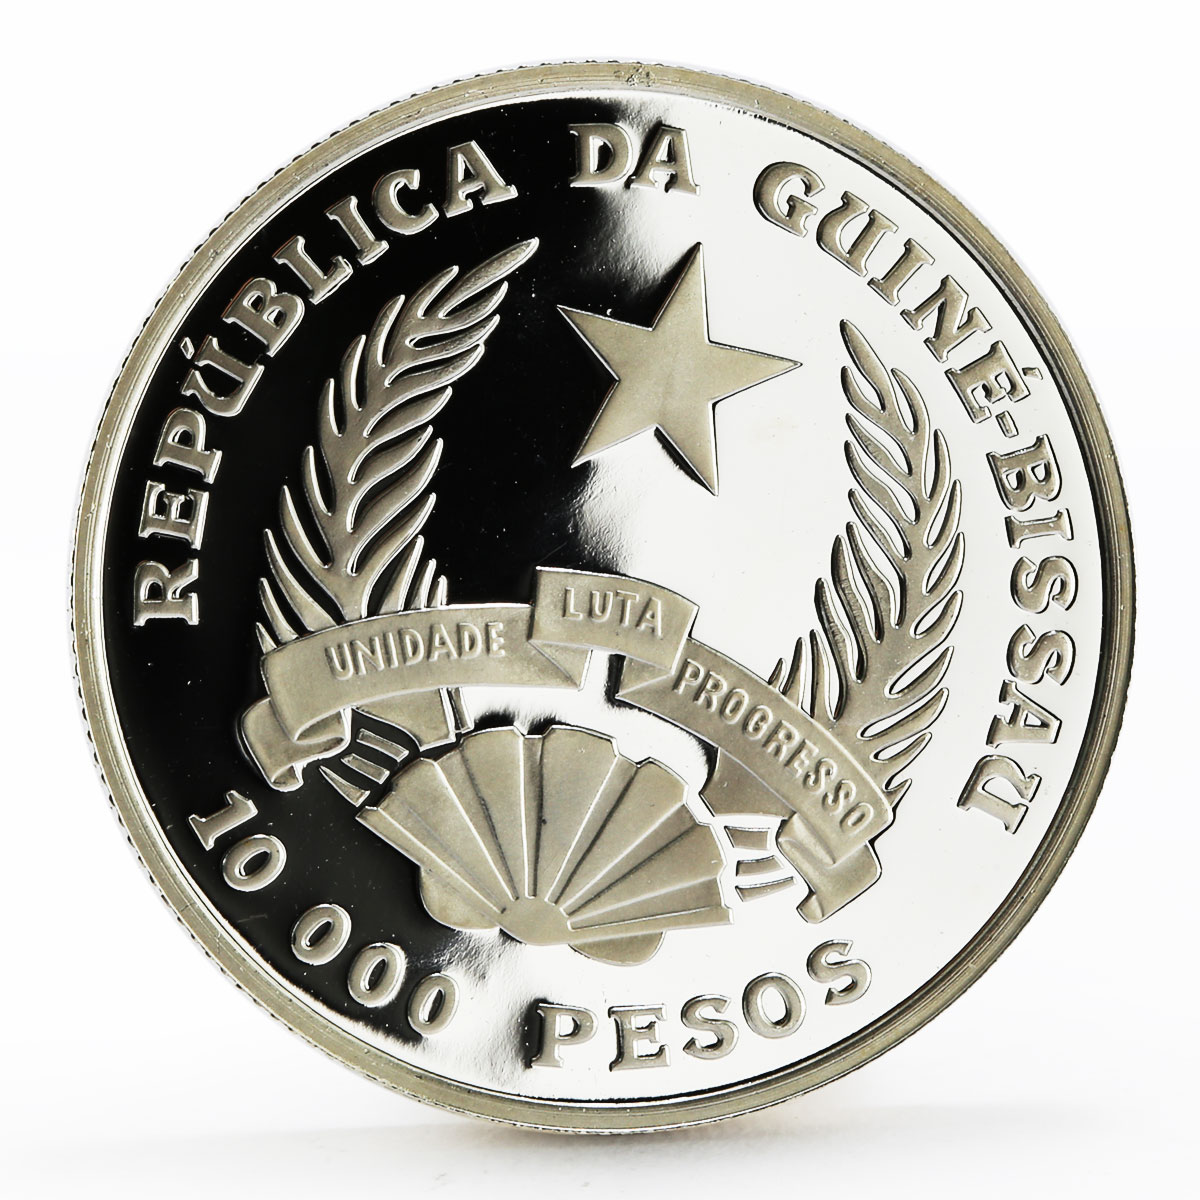 Guinea-Bissau 10000 pesos 15th World Football Cup proof silver coin 1992